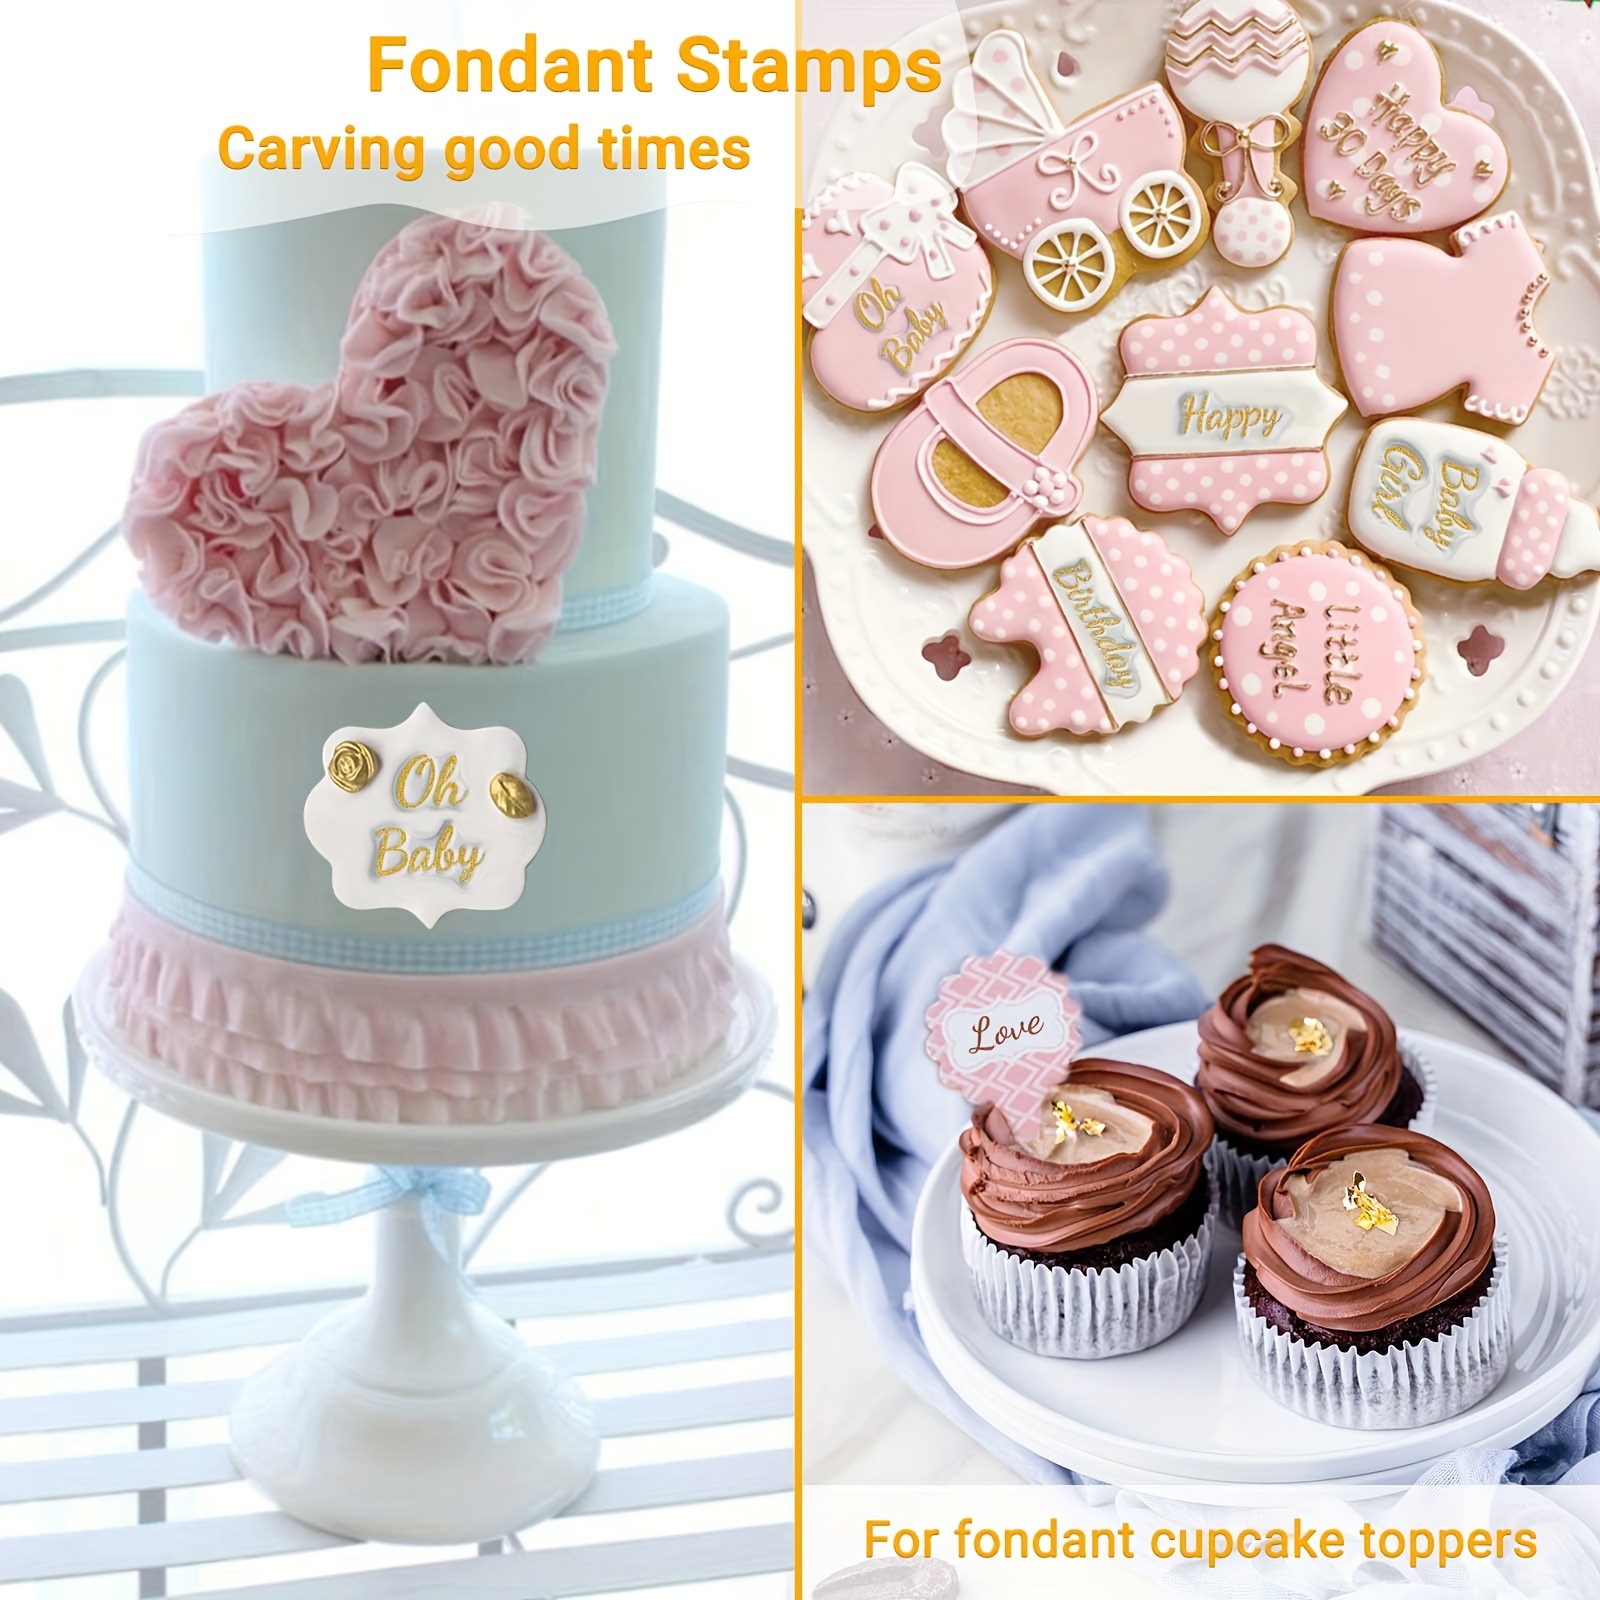 PME Fun Fonts 52 pc cake icing alphabet stamp set - from only £12.71